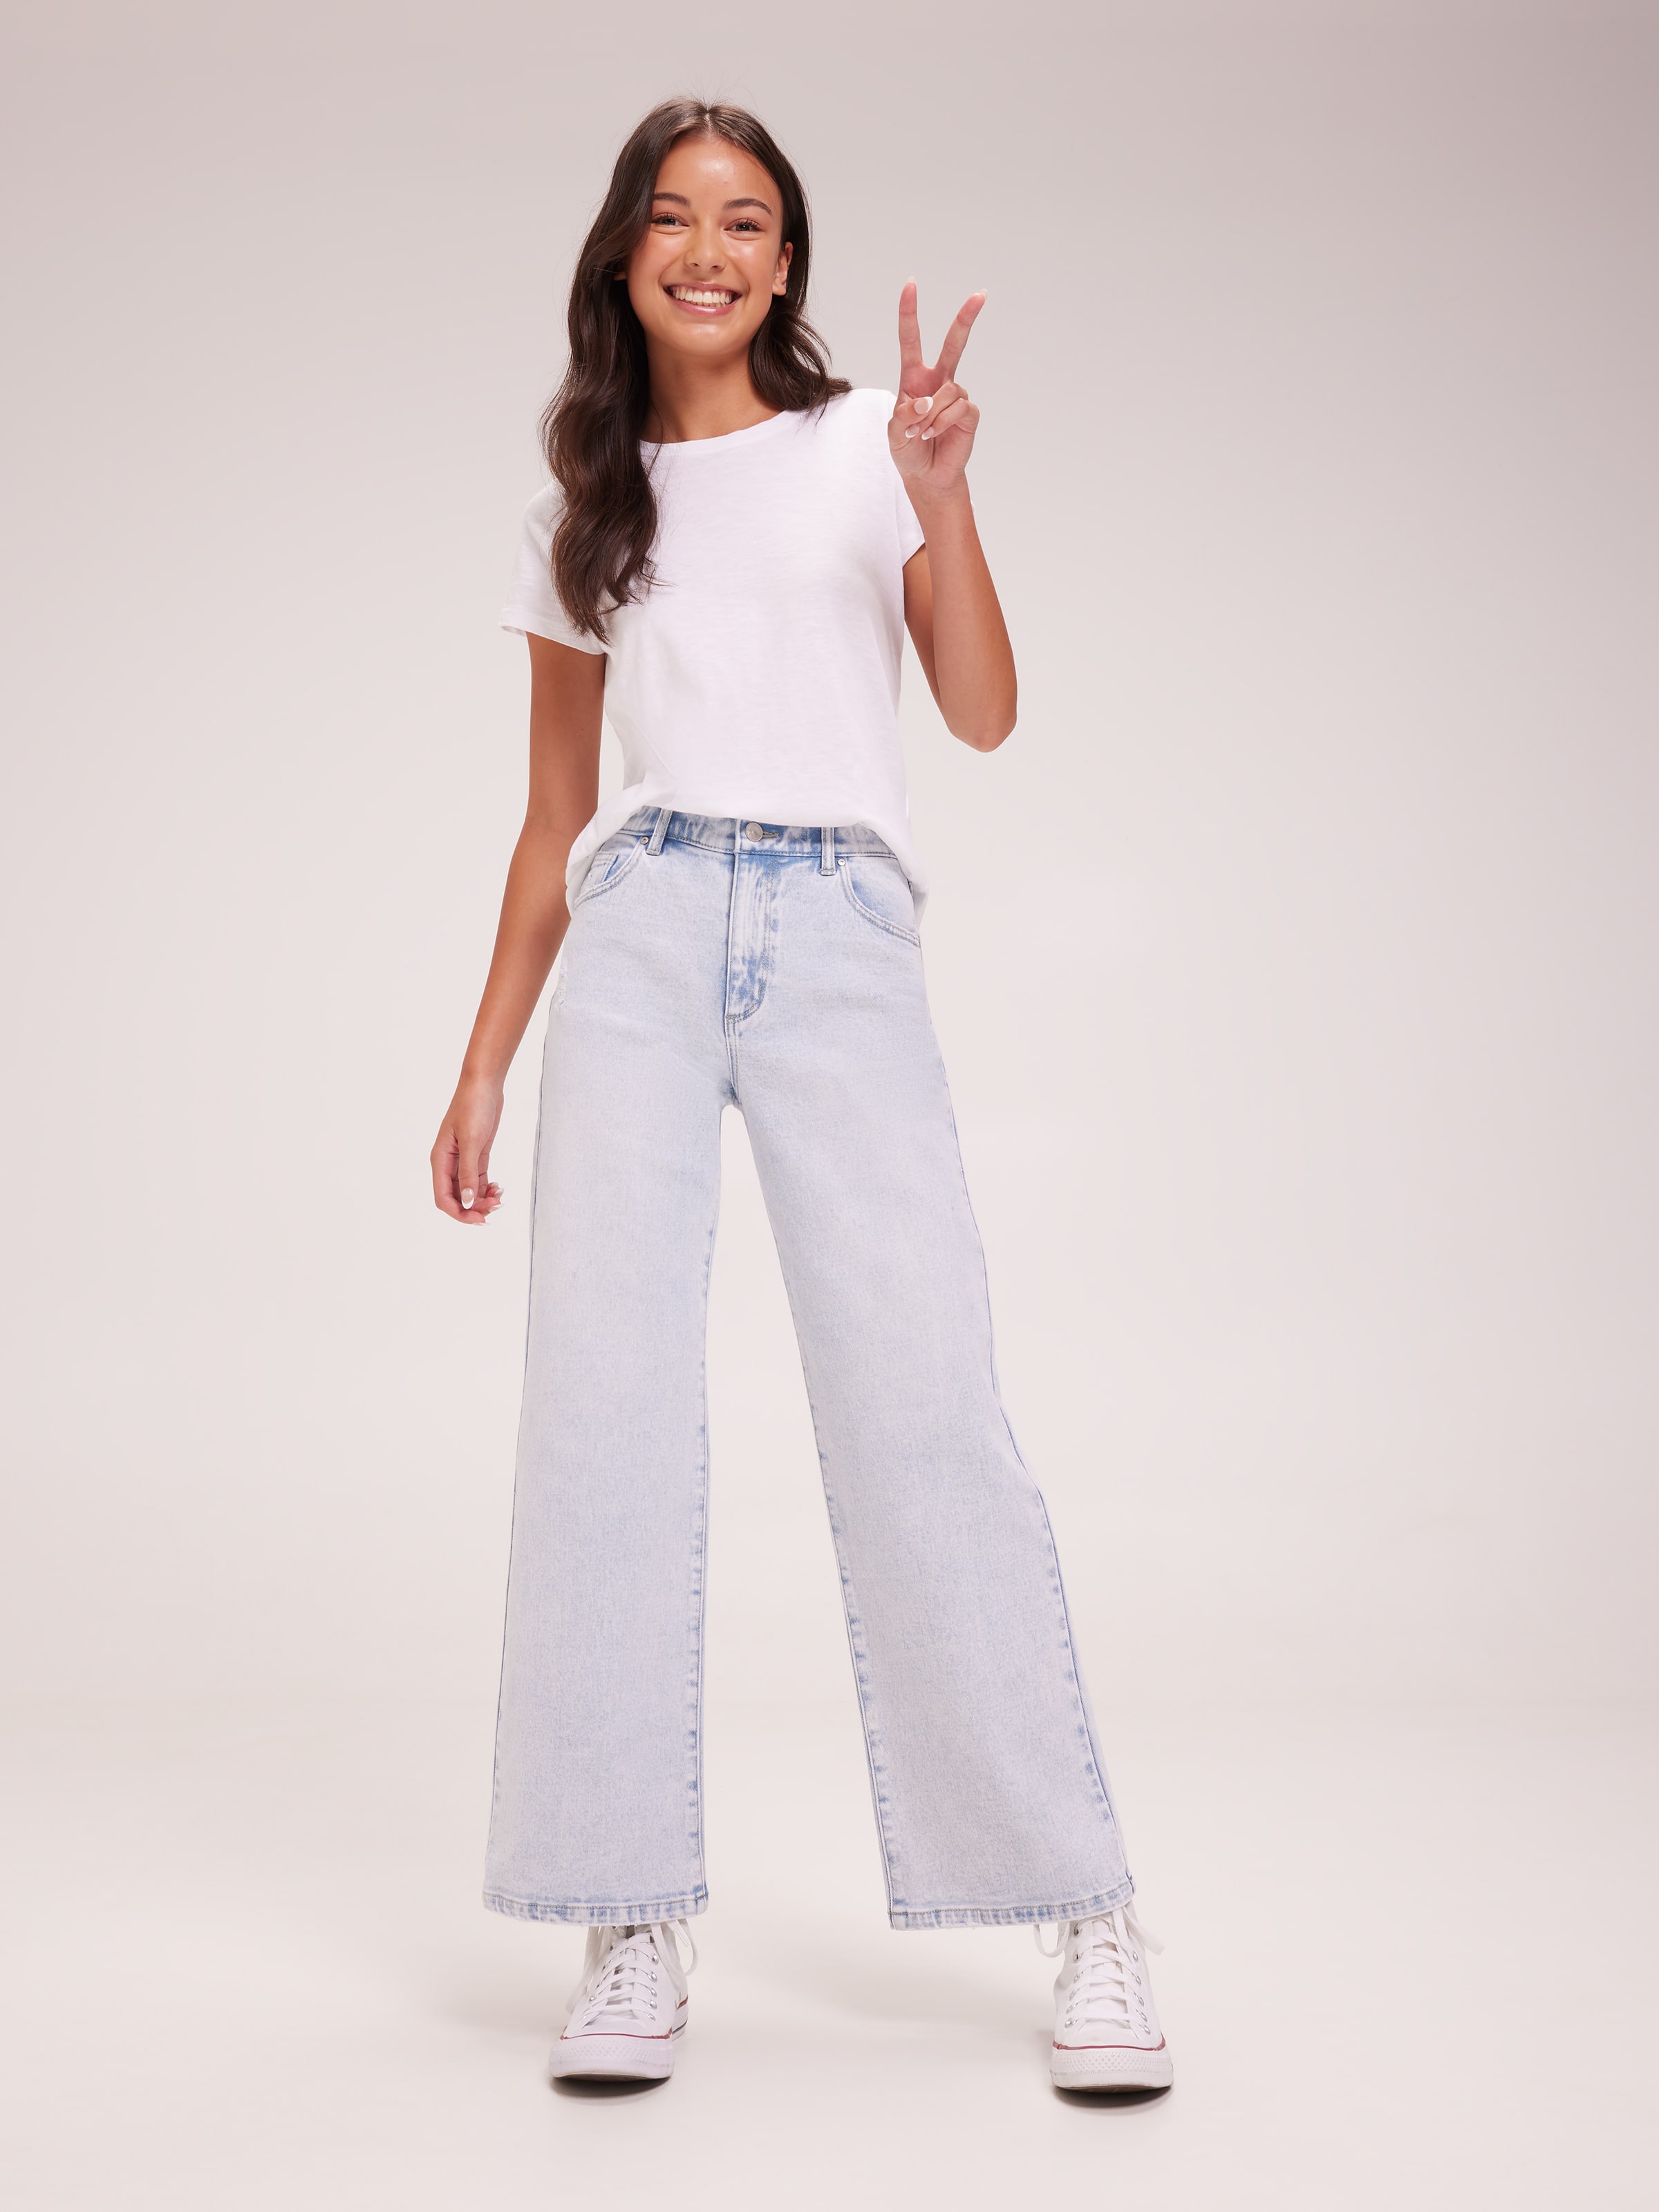 Girls Jeans & Casual Pants